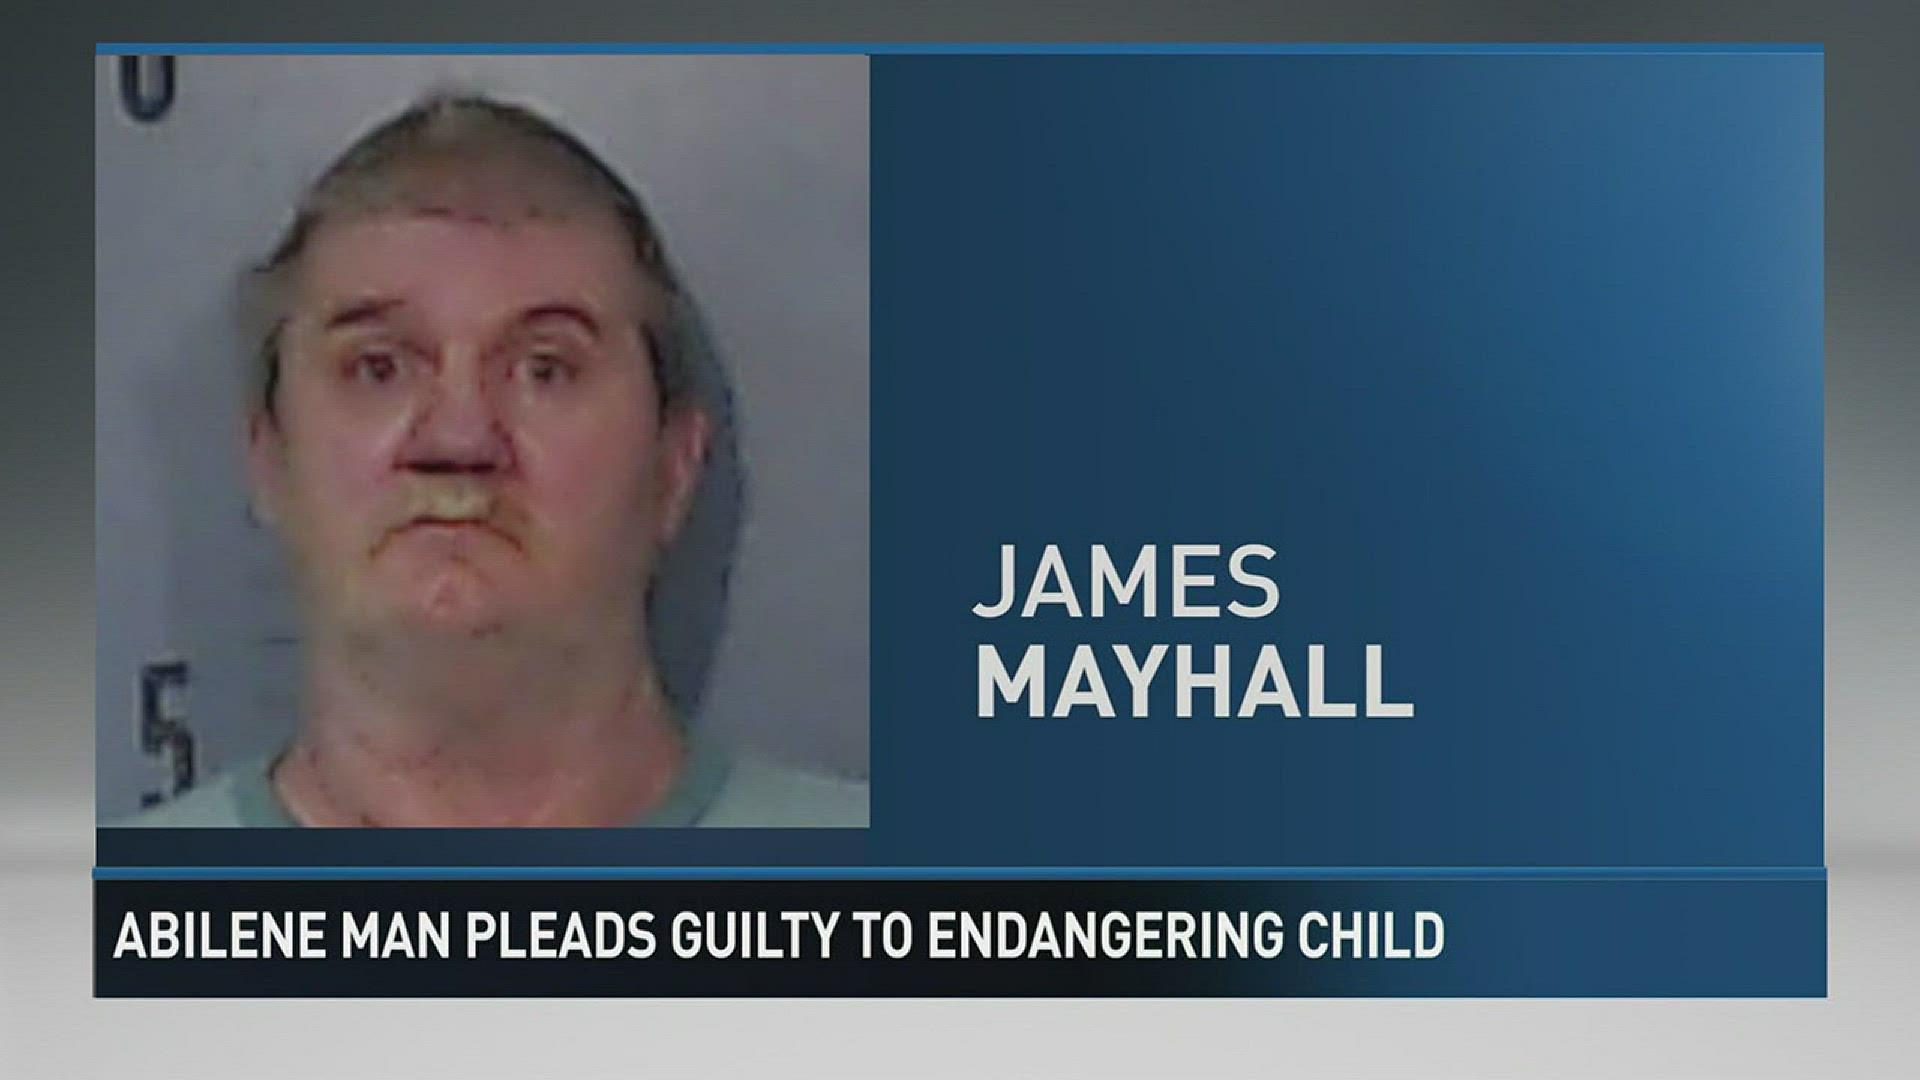 James Mayhall, 51, pleaded guilty to endangering a child.